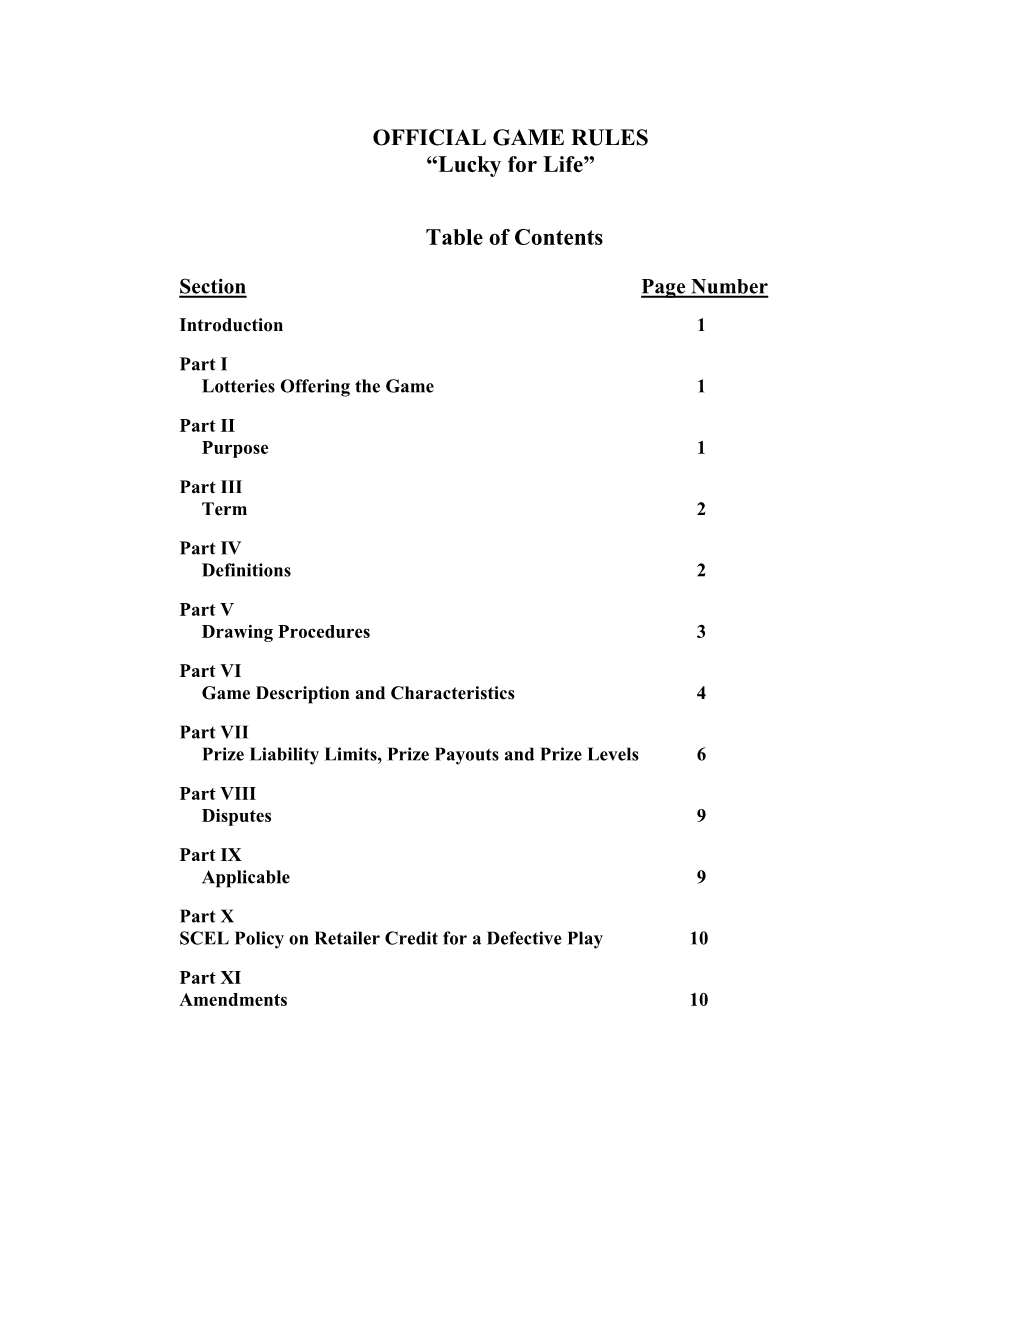 OFFICIAL GAME RULES “Lucky for Life” Table of Contents